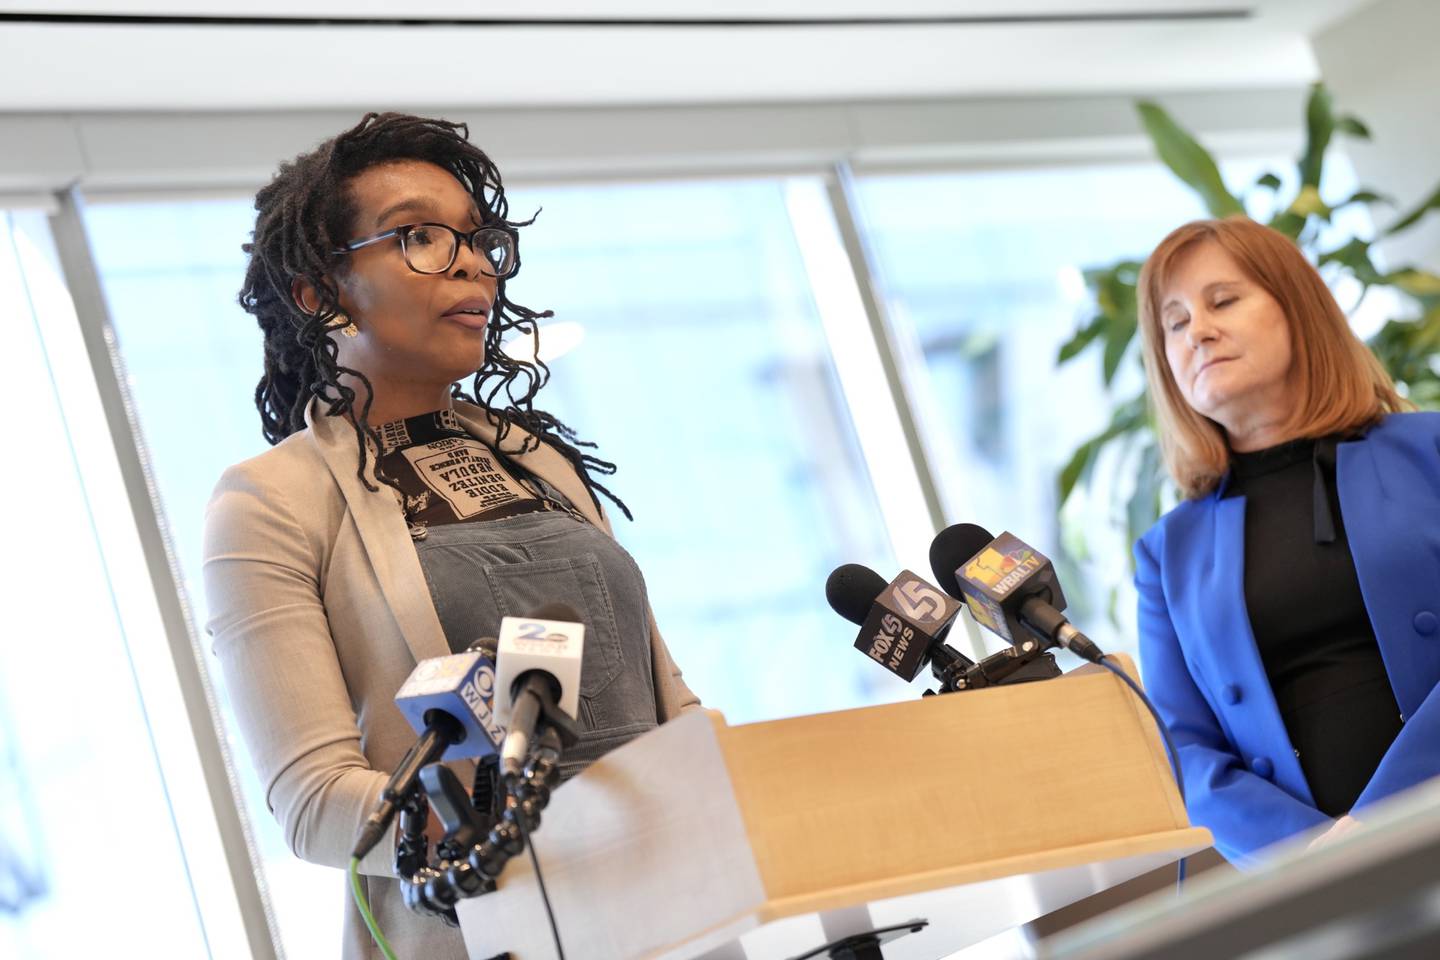 Chelsea Gilliam, a transgender woman who was held pre-trial at two Maryland correctional facilities for six months and placed in male dormitories, speaks at a press conference announcing a lawsuit against the department of public safety and correctional services on April 19, 2023.